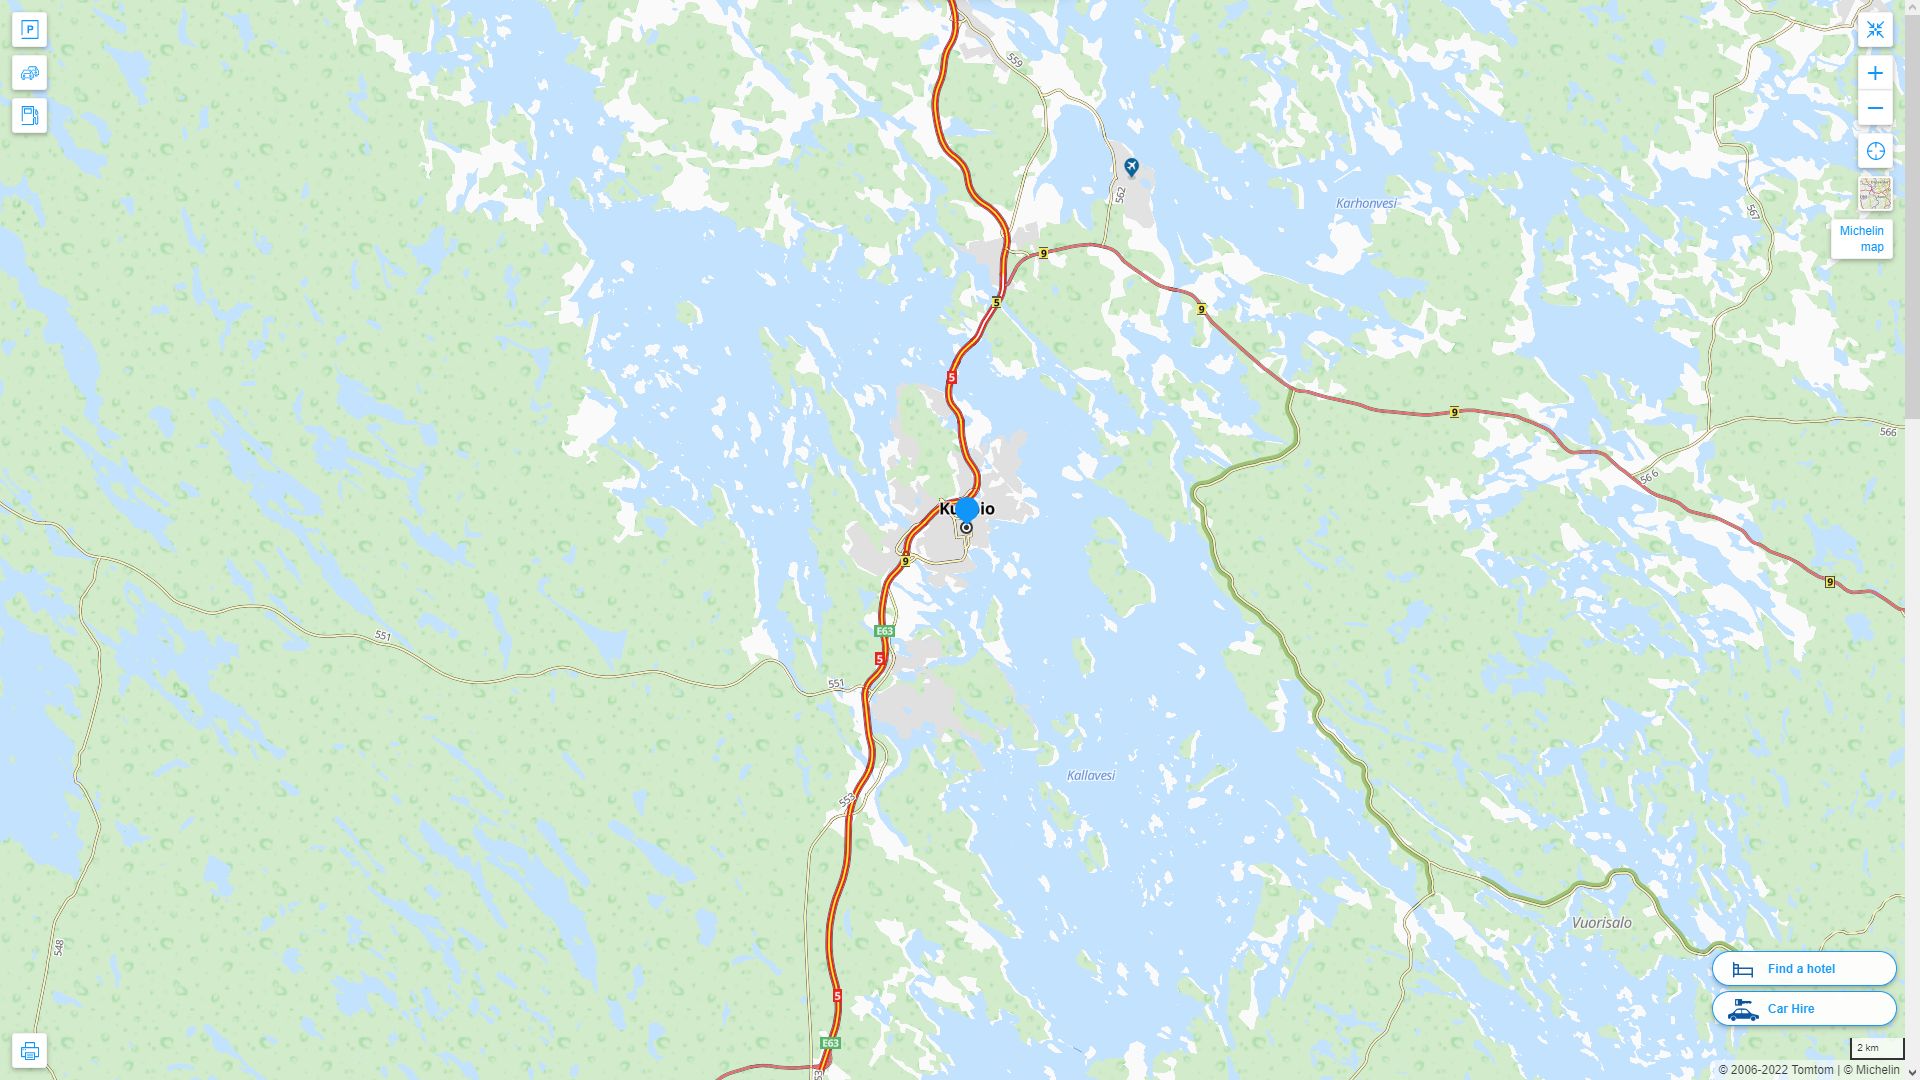 Kuopio Highway and Road Map